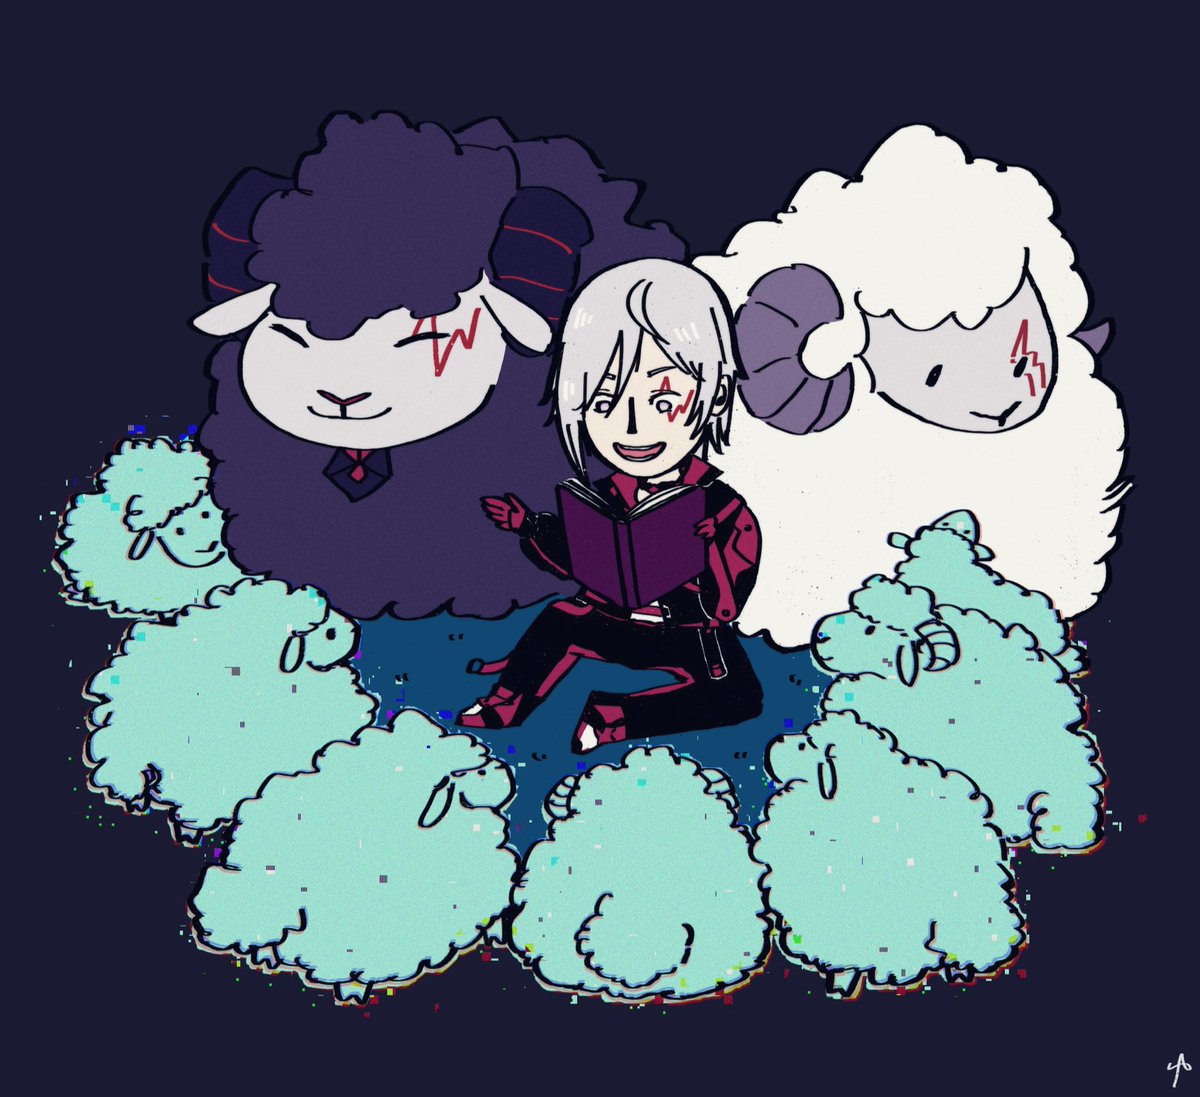 [old art repost] This is literally us rn 📖 Love the comfy story-time with sheep pile~
#Artchivist #FulgurOvidHere